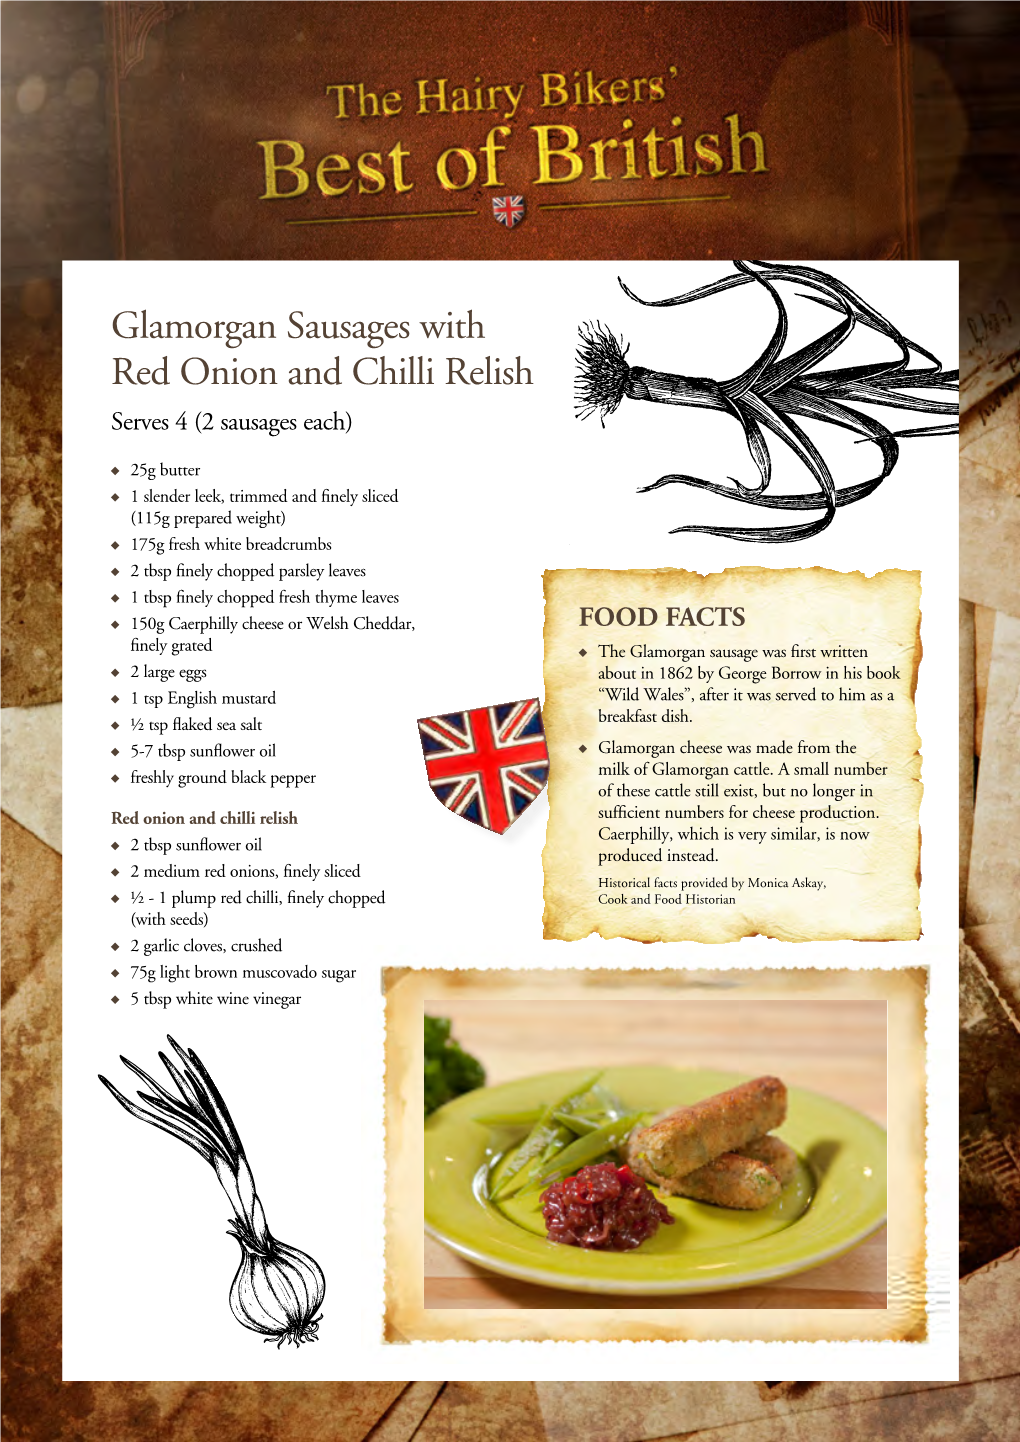 Glamorgan Sausages with Red Onion and Chilli Relish Serves 4 (2 Sausages Each)